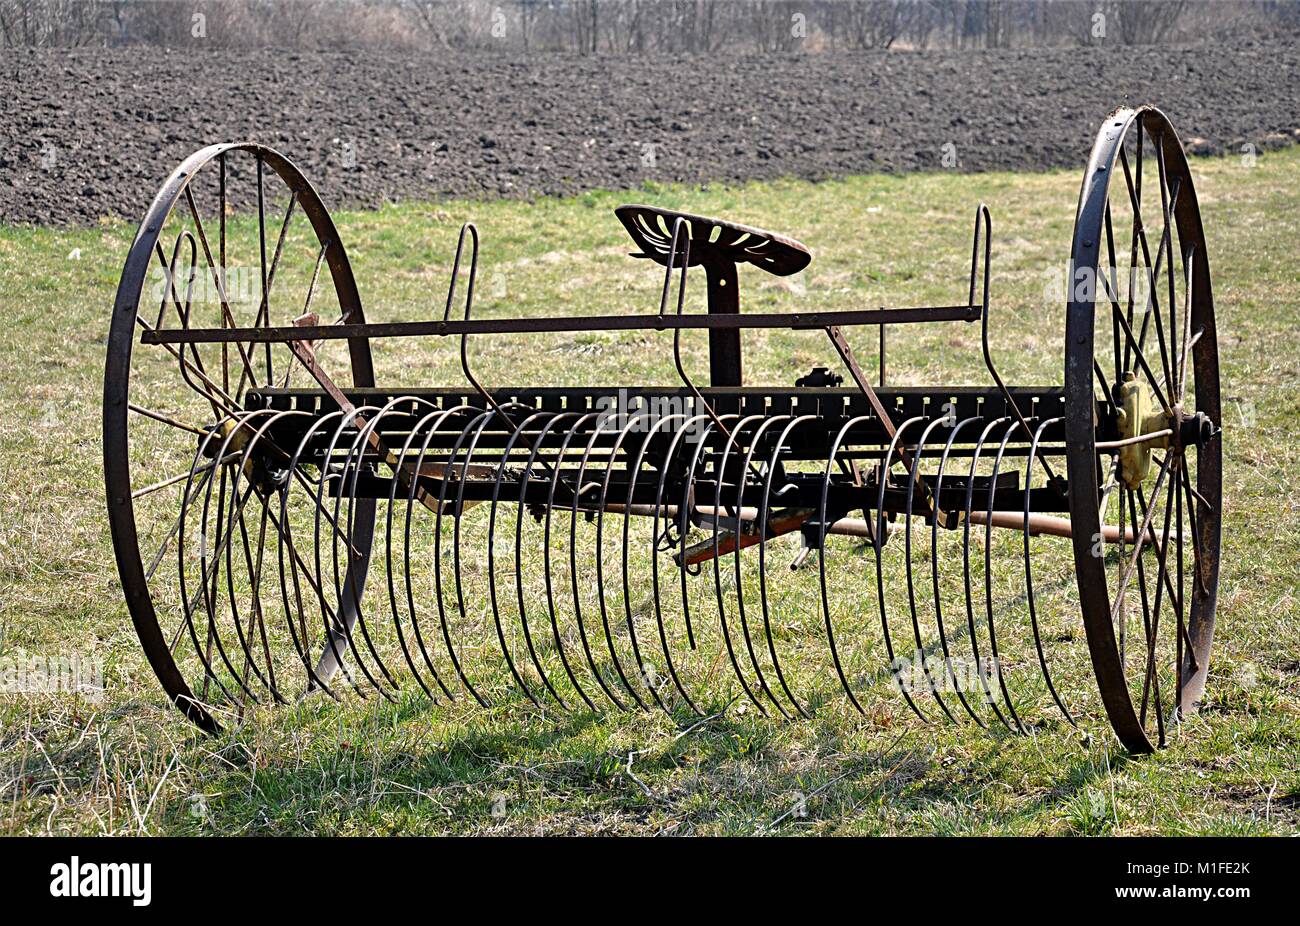 Old Farming Tools High Resolution Stock Photography and Images - Alamy